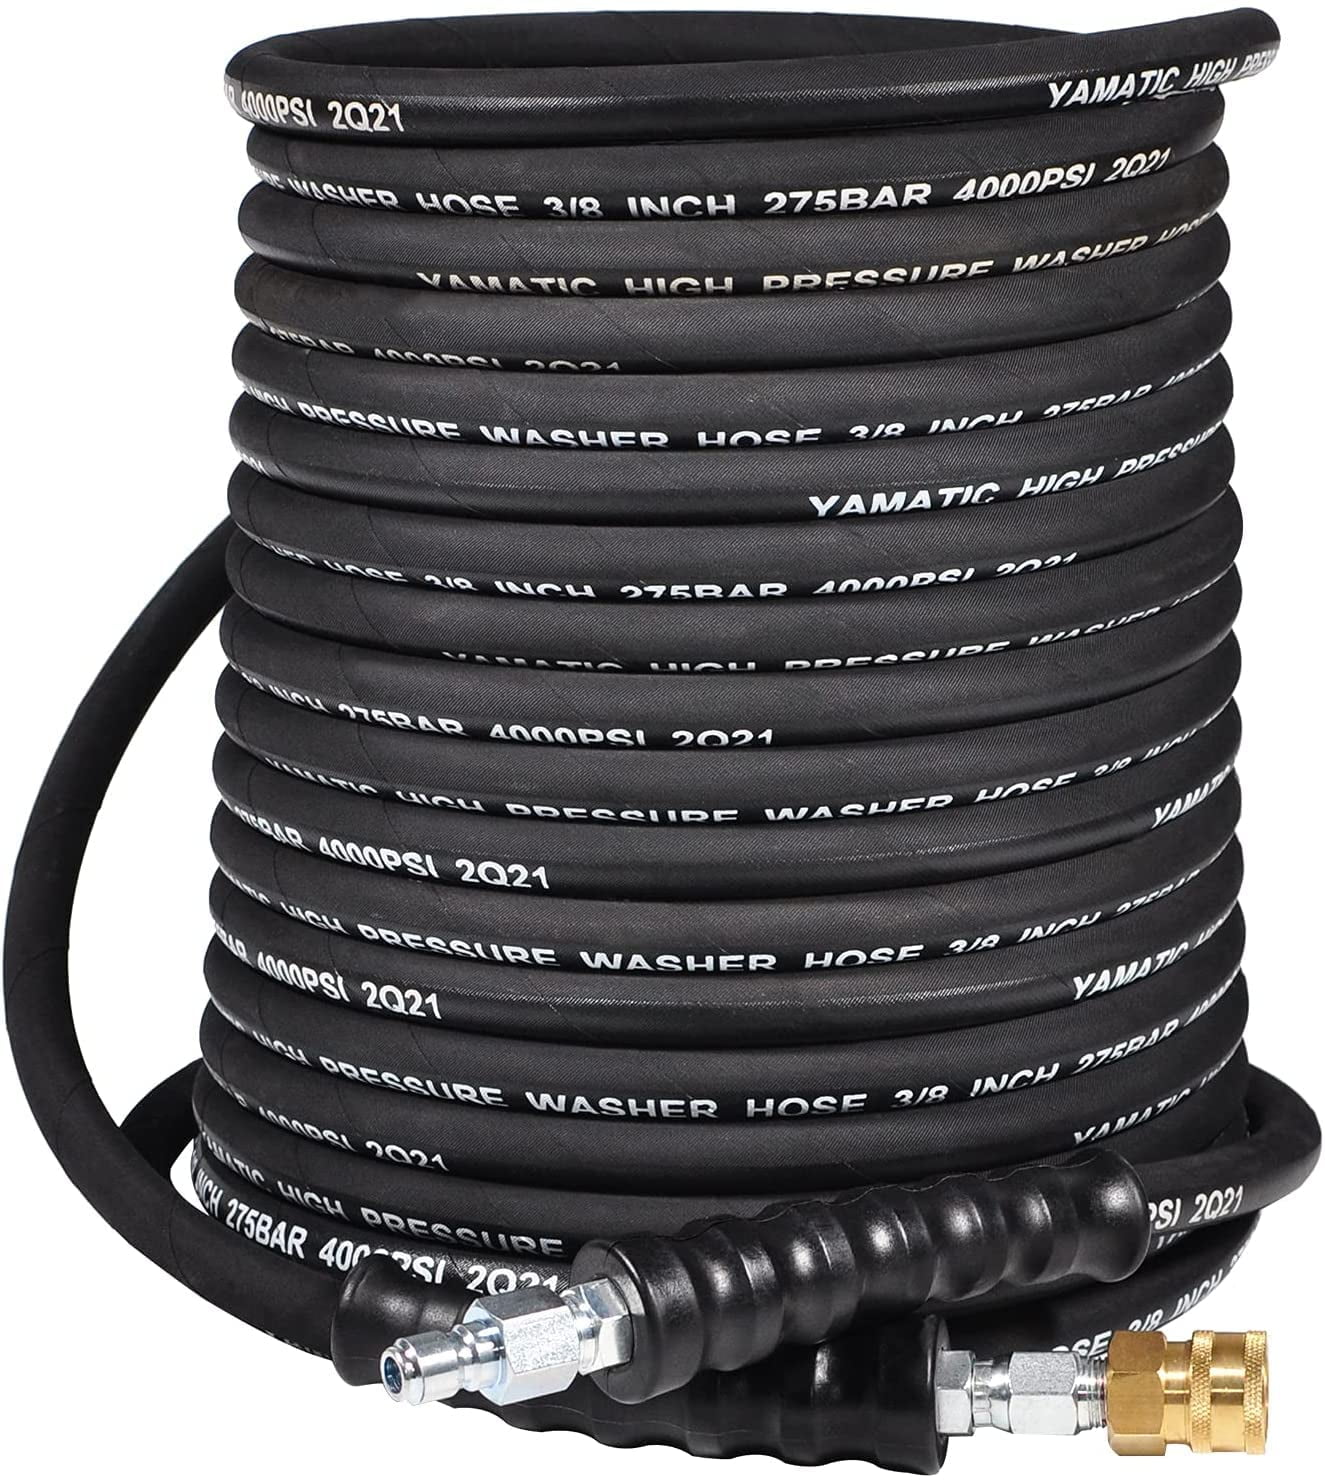 YAMATIC 3/8 inch Pressure Washer Hose 50 ft with Swivel Quick Connect for Cold & Hot Water Max 250F, 4000 PSI Commercial Grade Steel Wire Braided 